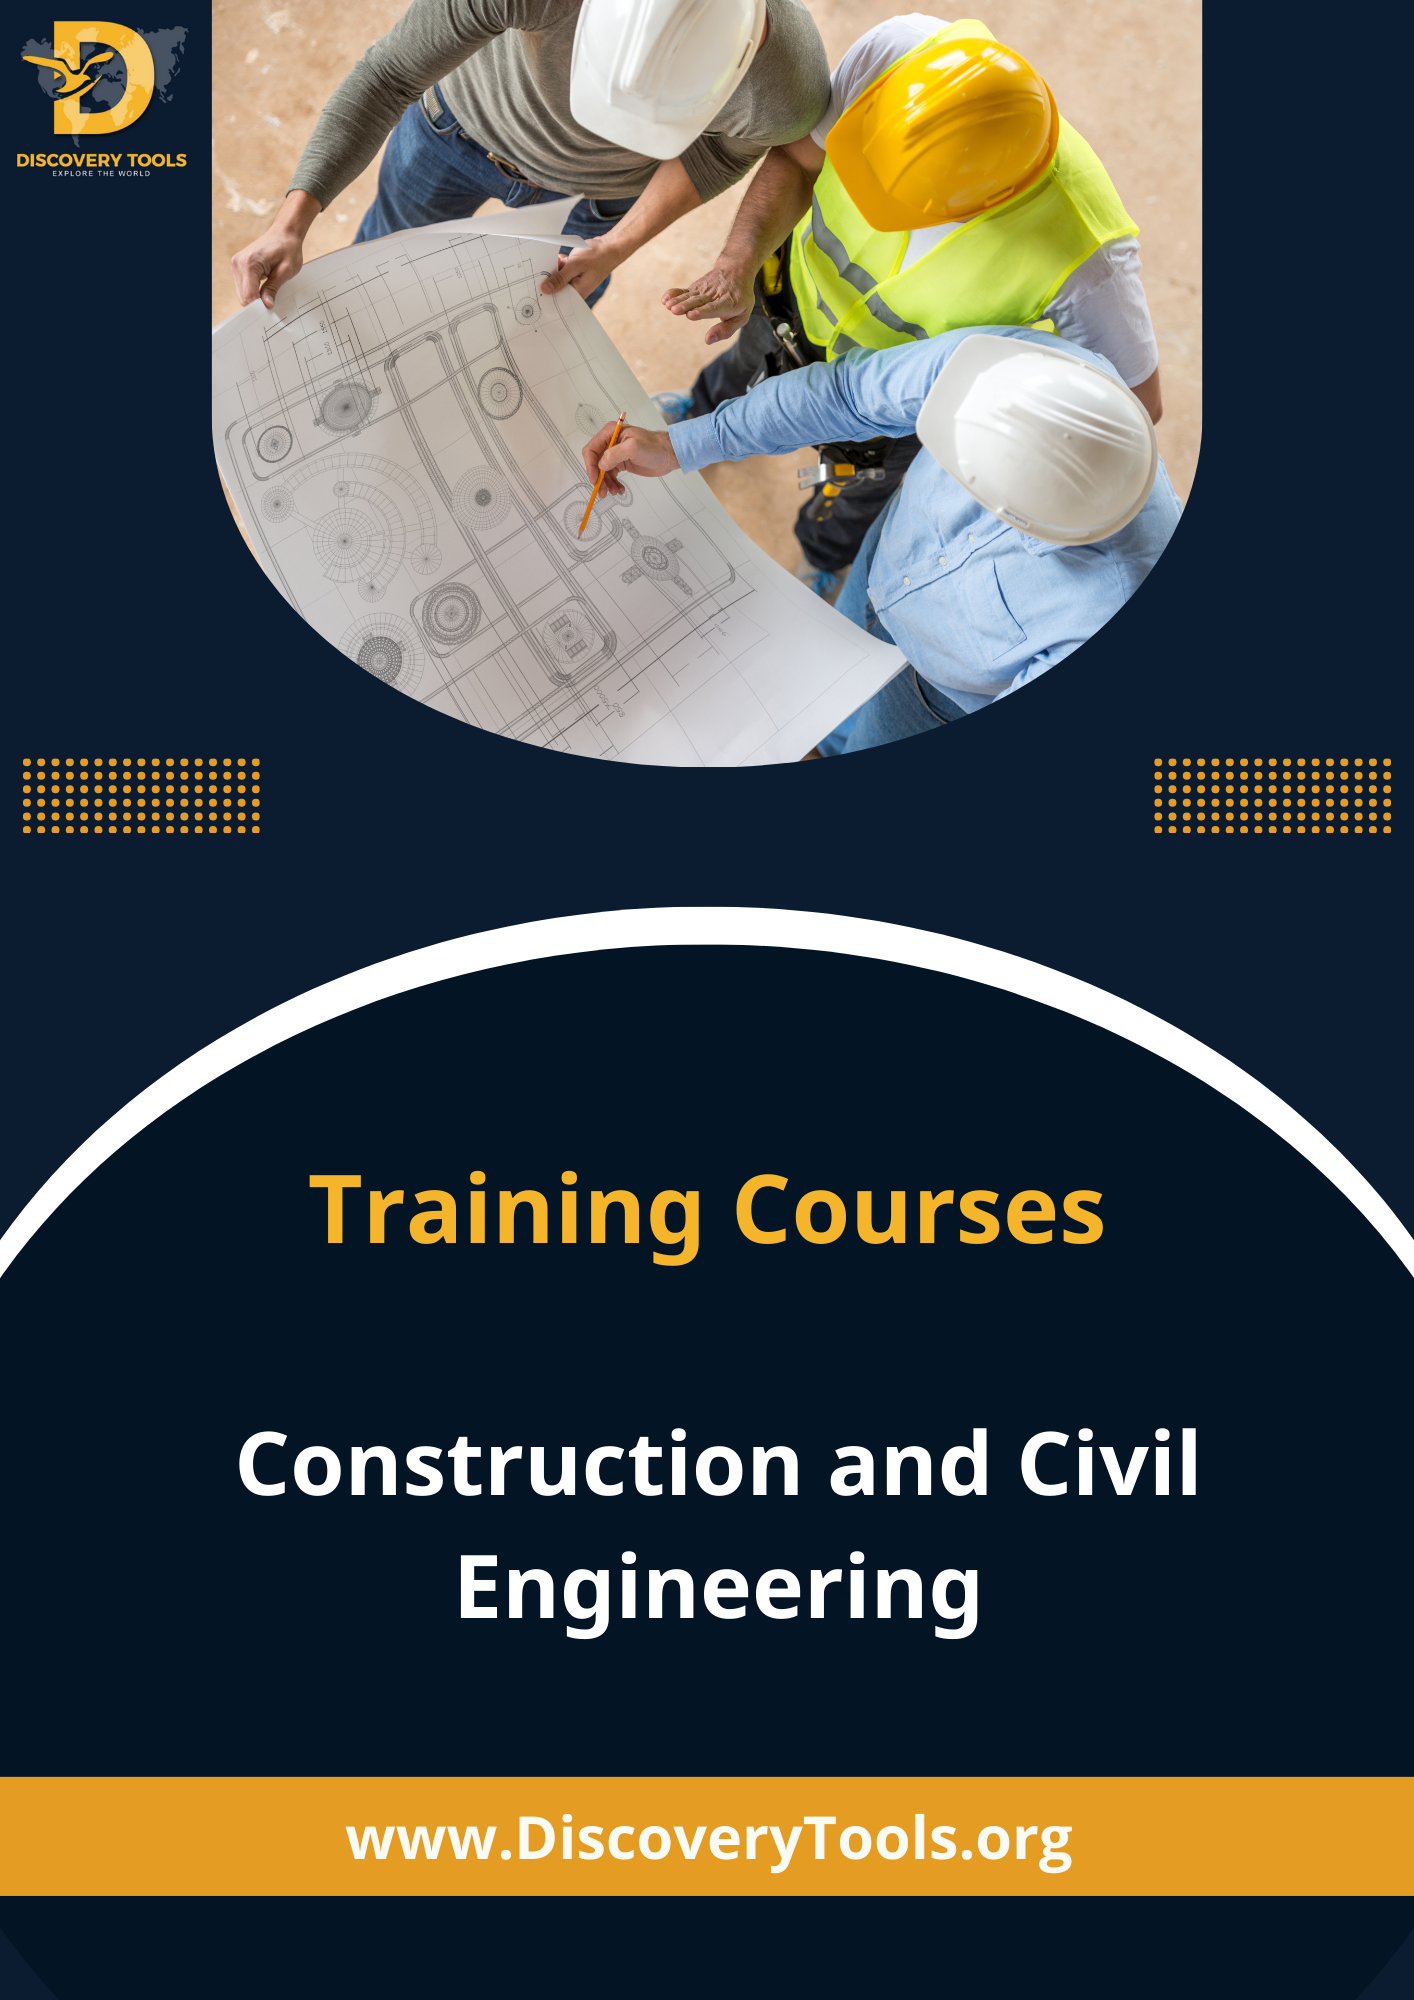 Construction and Civil Engineering